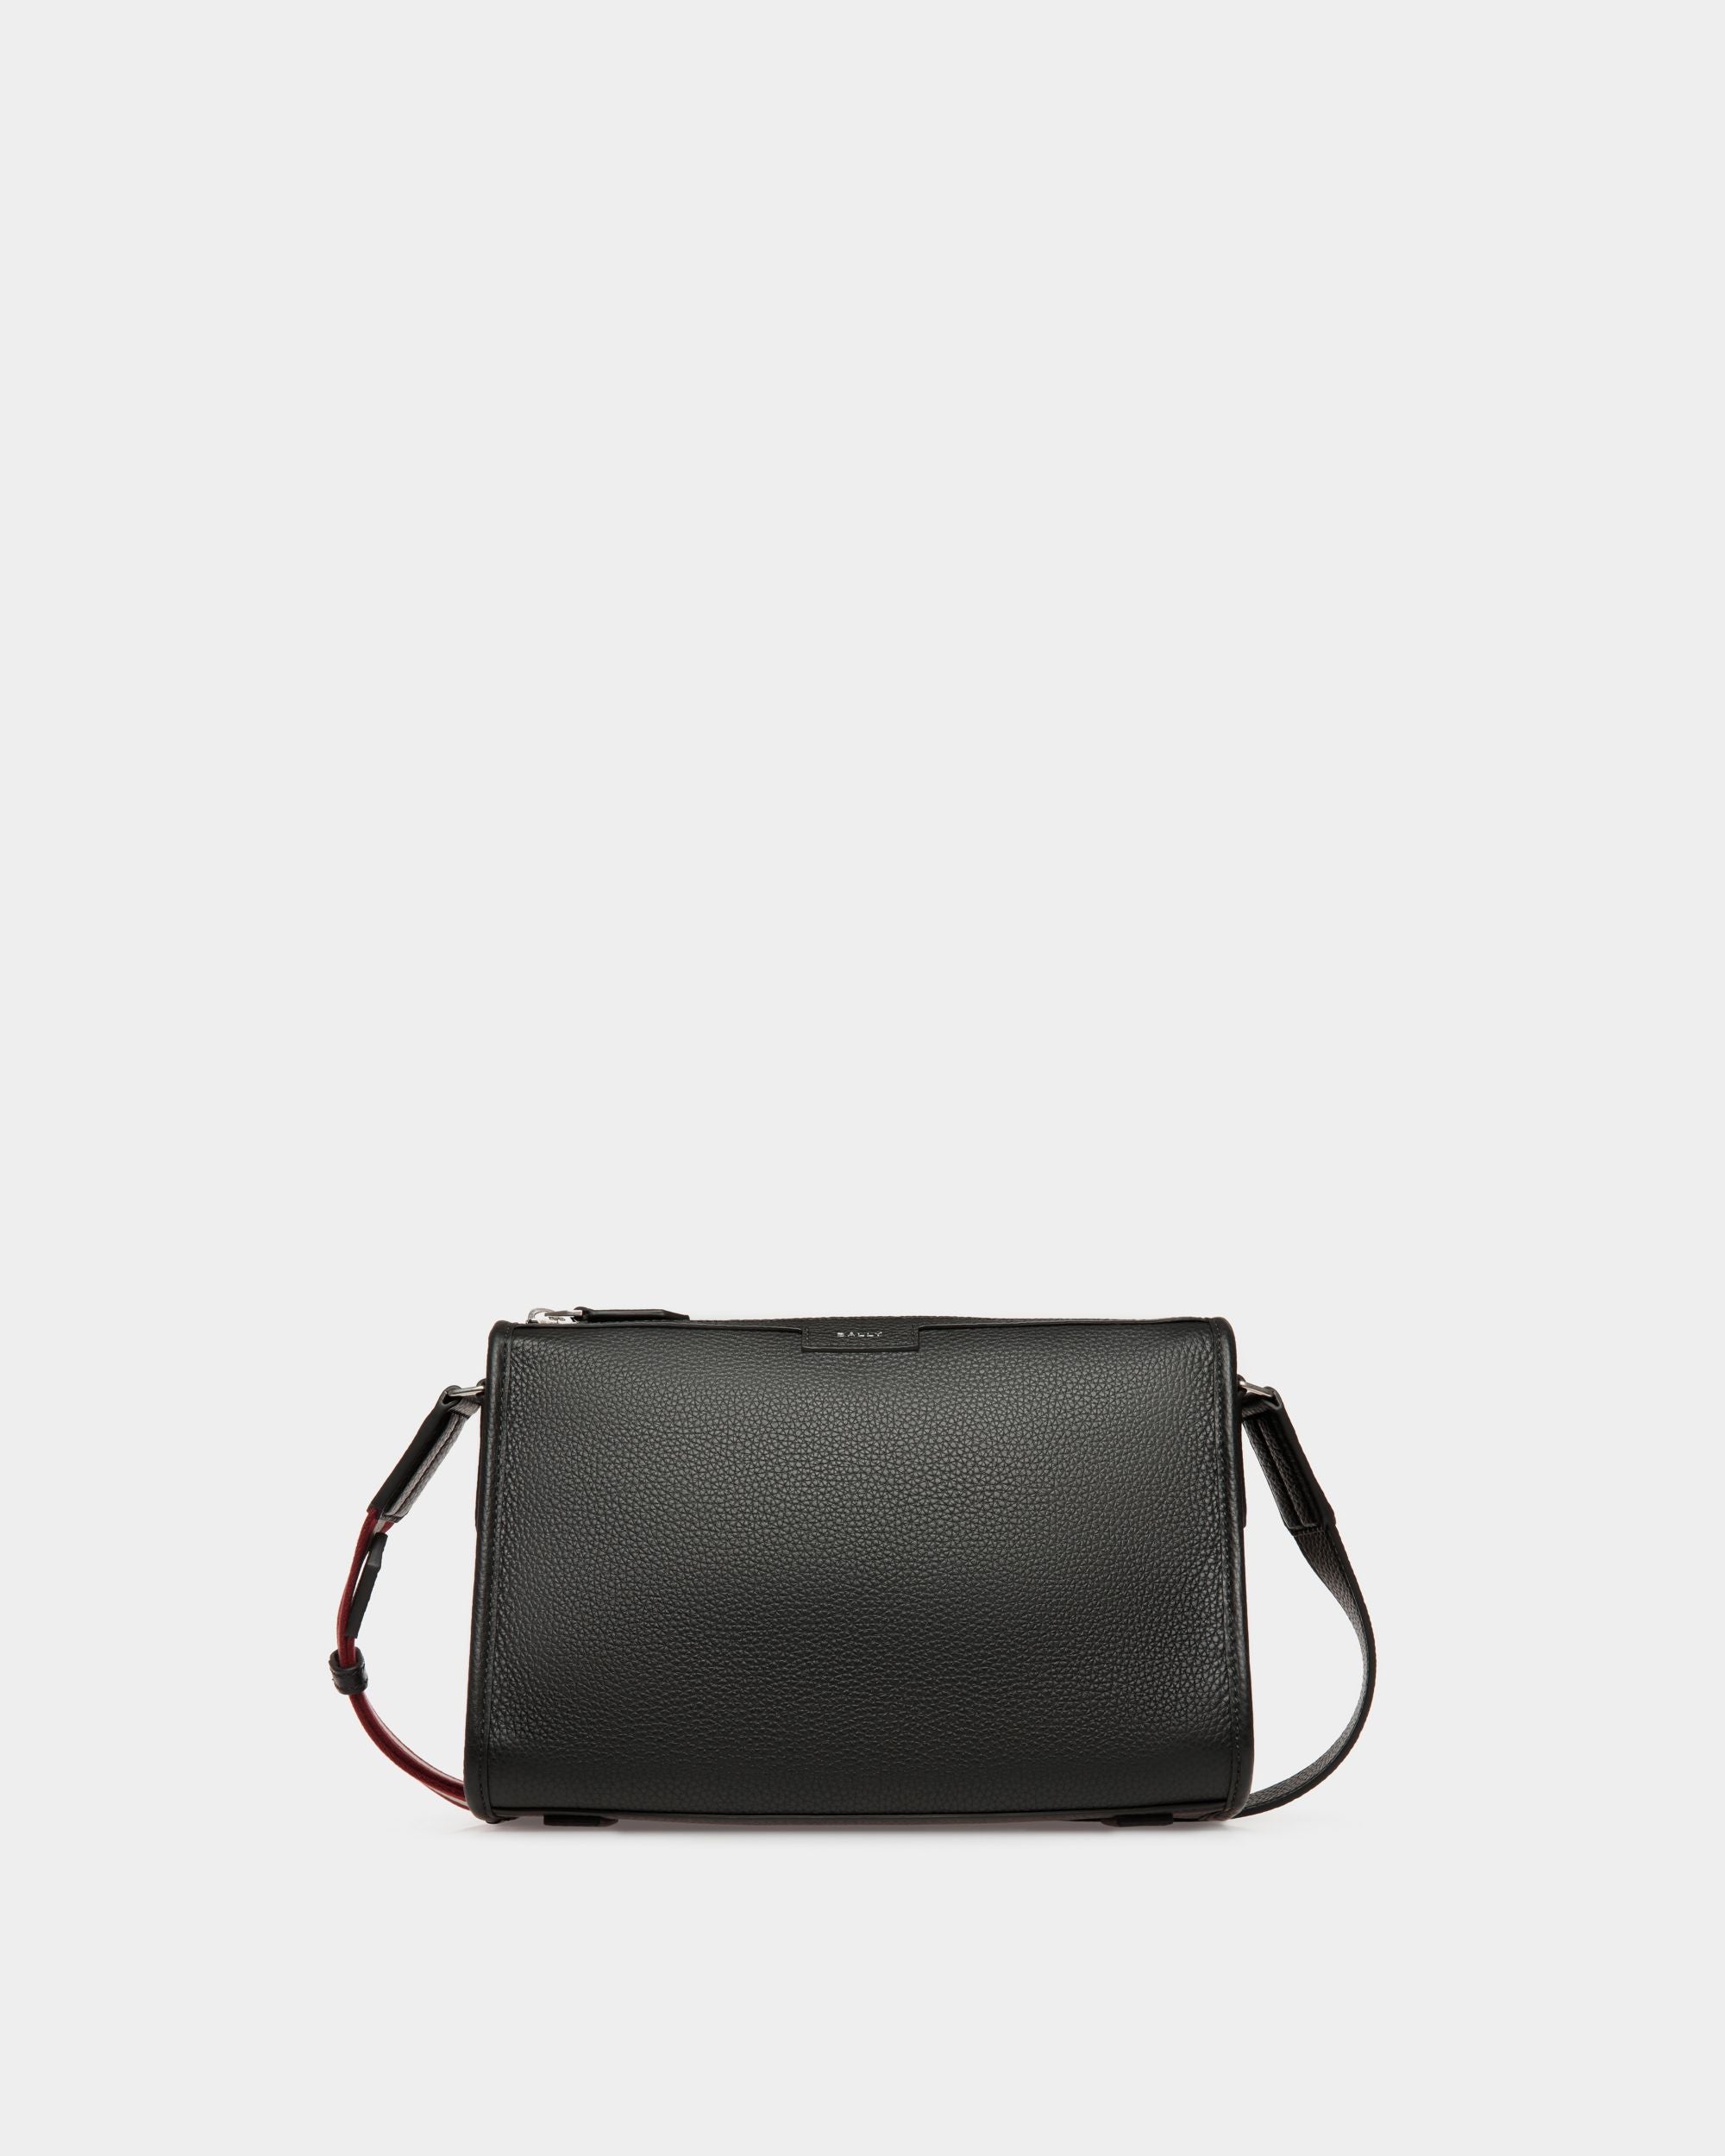 Code | Men's Small Messenger Bag in Black Grained Leather | Bally | Still Life Front